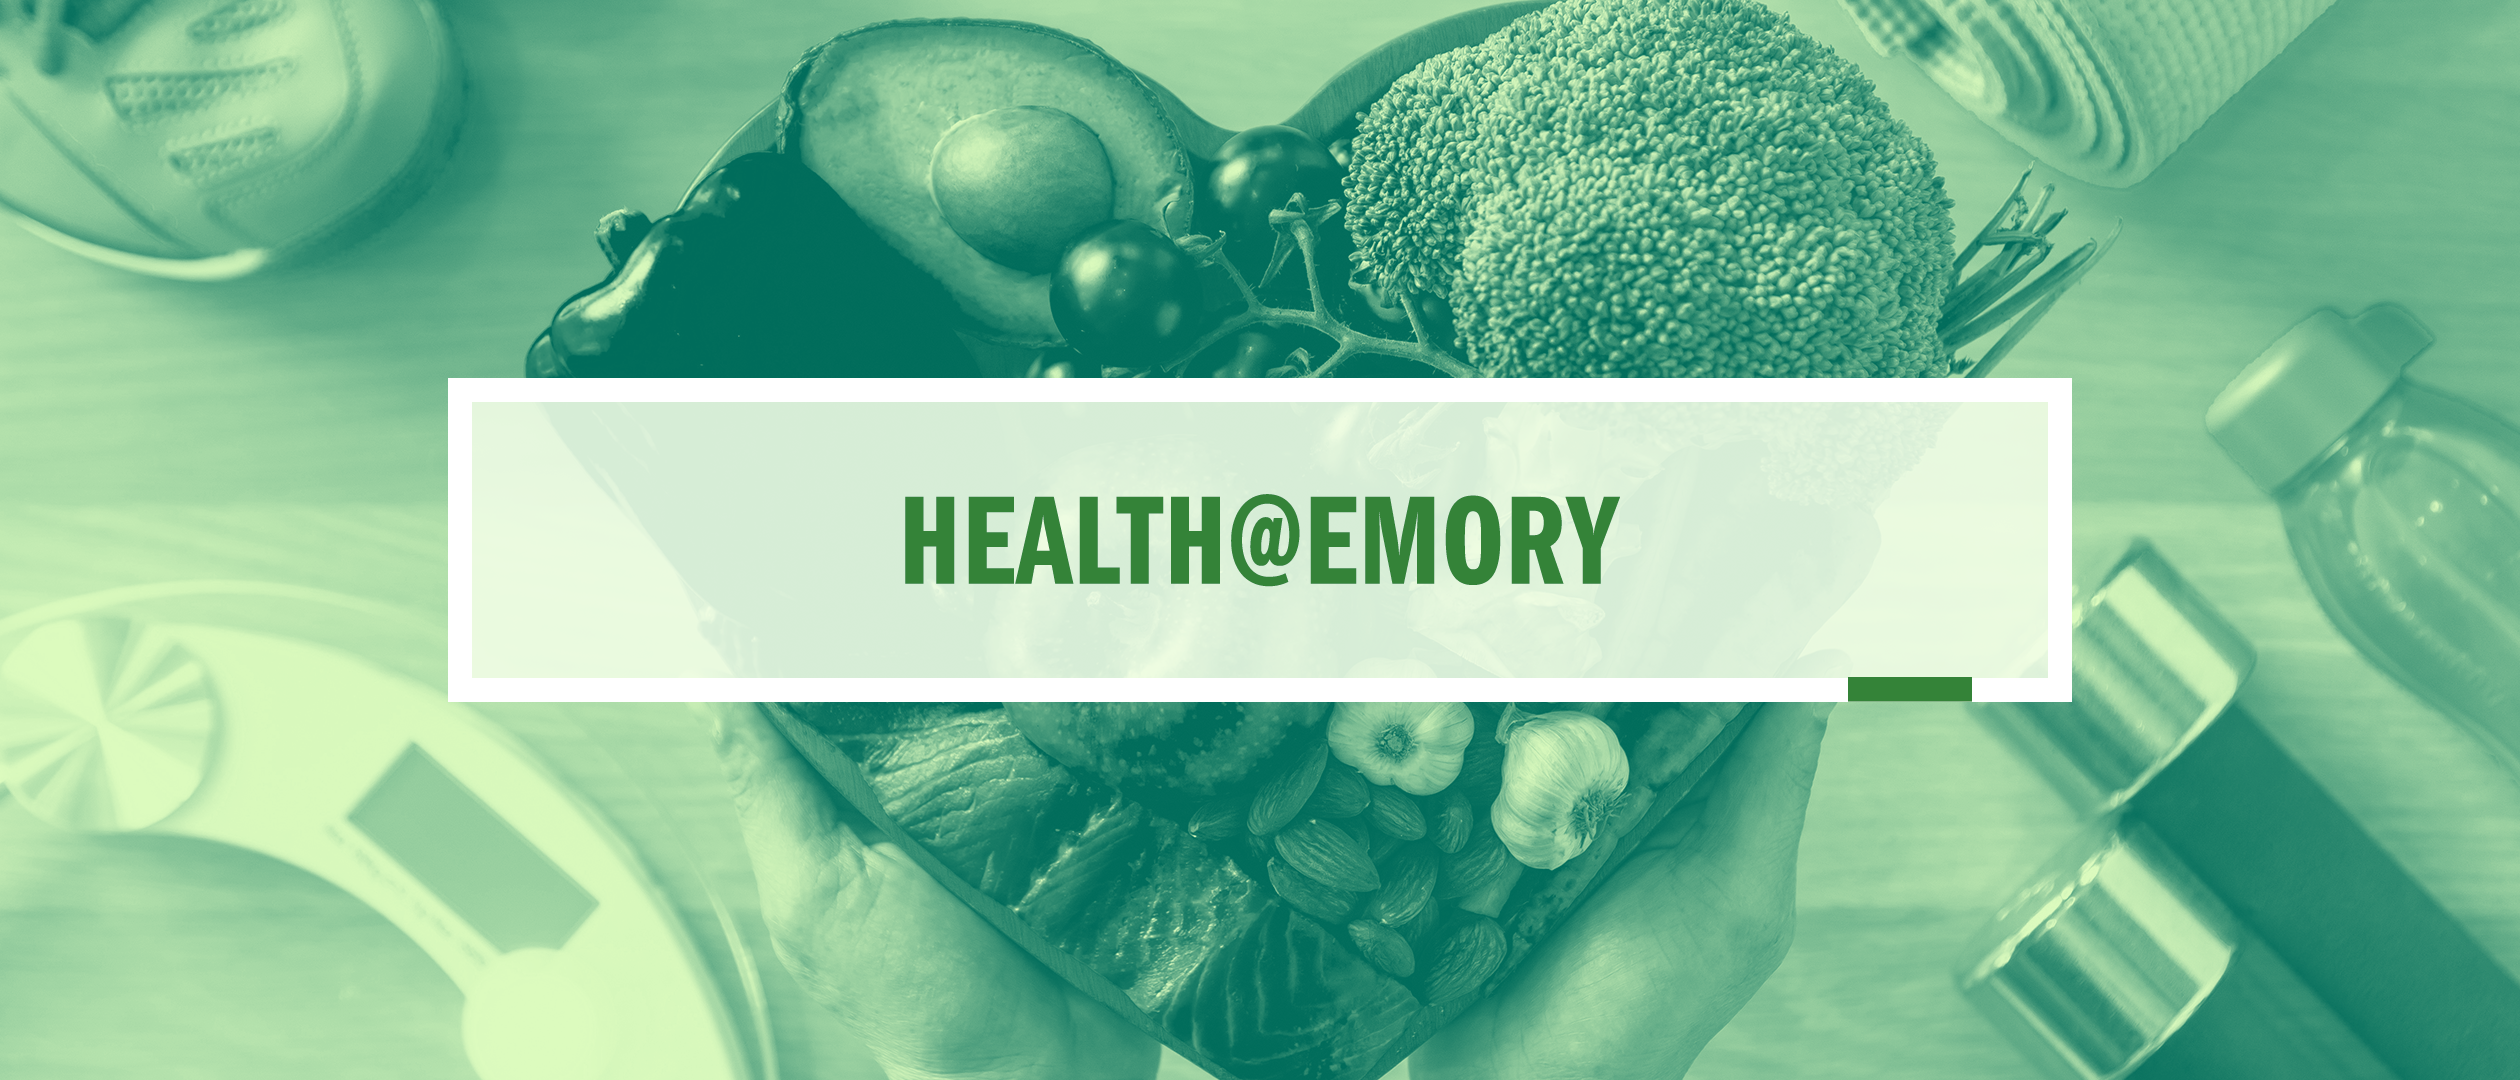 A pale-green image of fruits and vegetables held by two Caucasian hands in a heart shape, with a scale, water bottle and dumbbells in the background. Surmounted by a semi-opaque white box holding the words "Health@Emory"